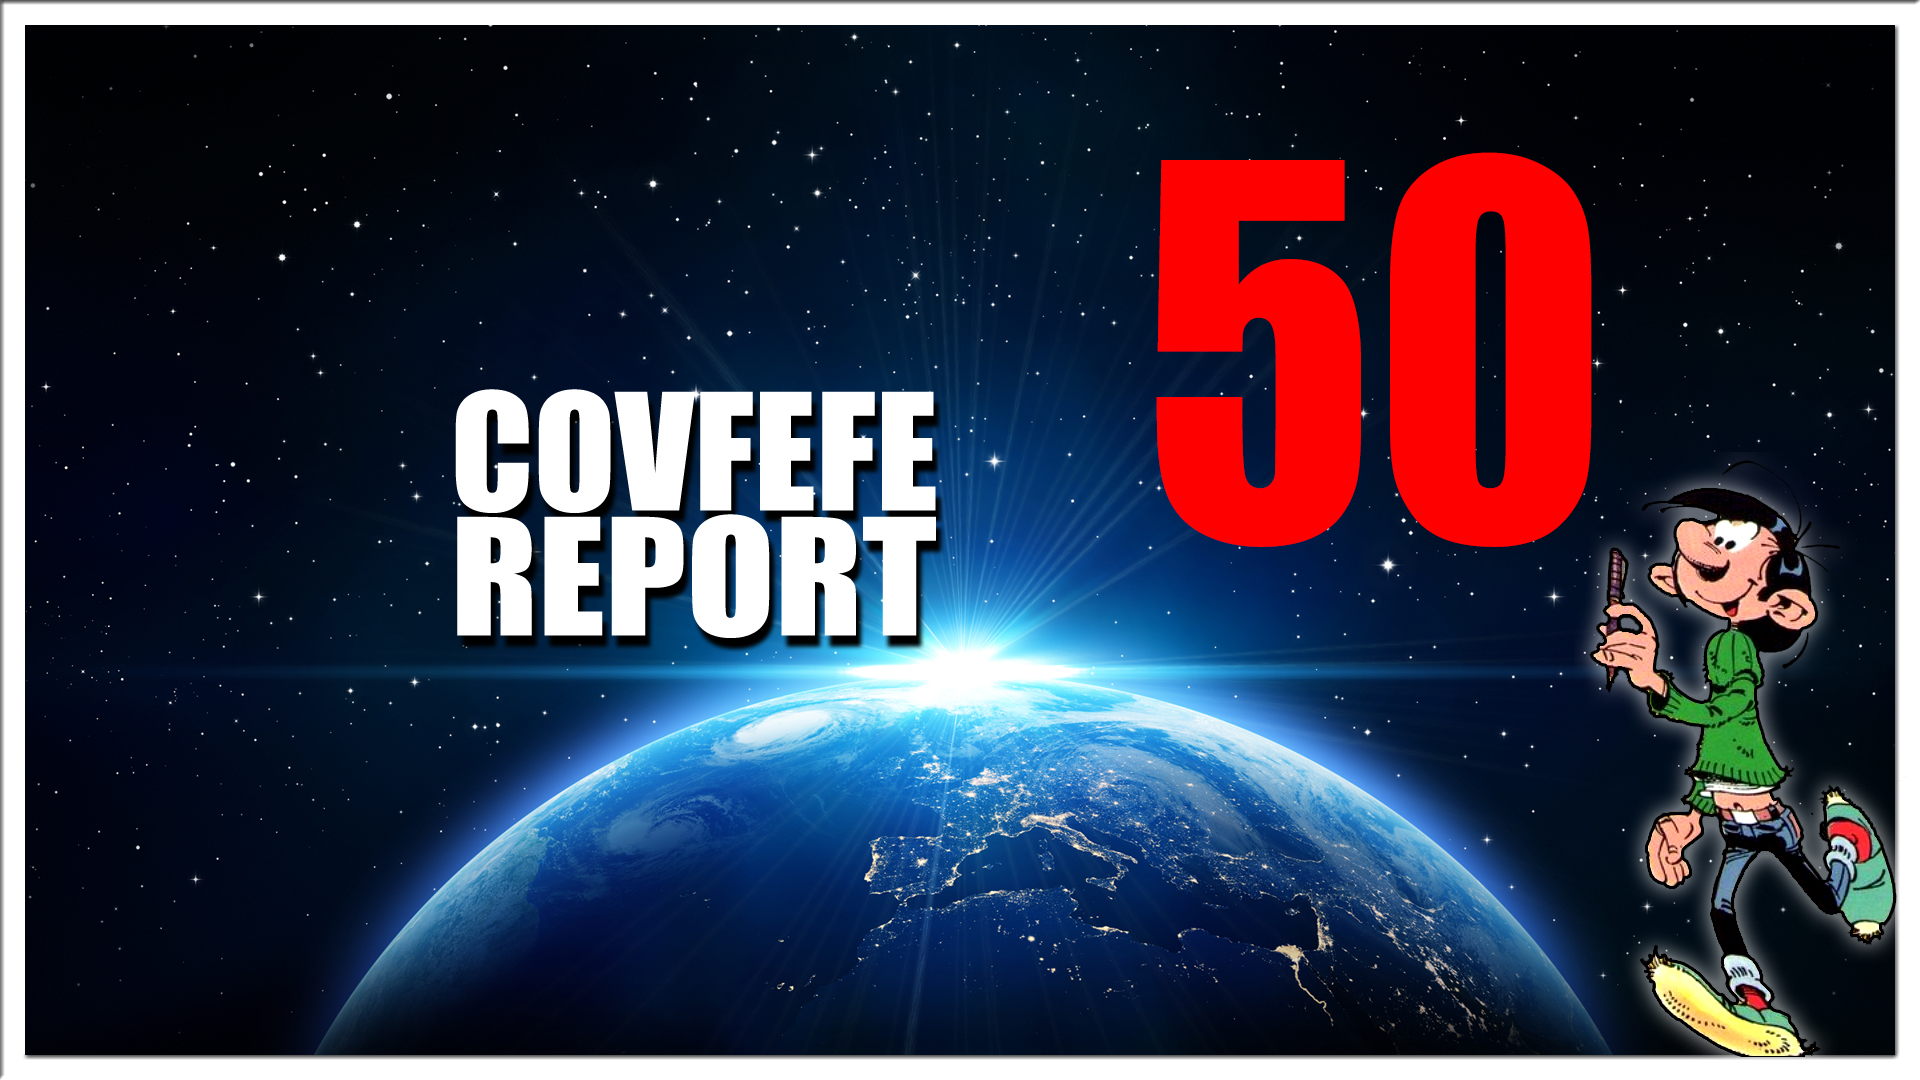 Covfefe Report 50. Panic in DC, Tata Steel loost gif, Uitnodiging Hassan